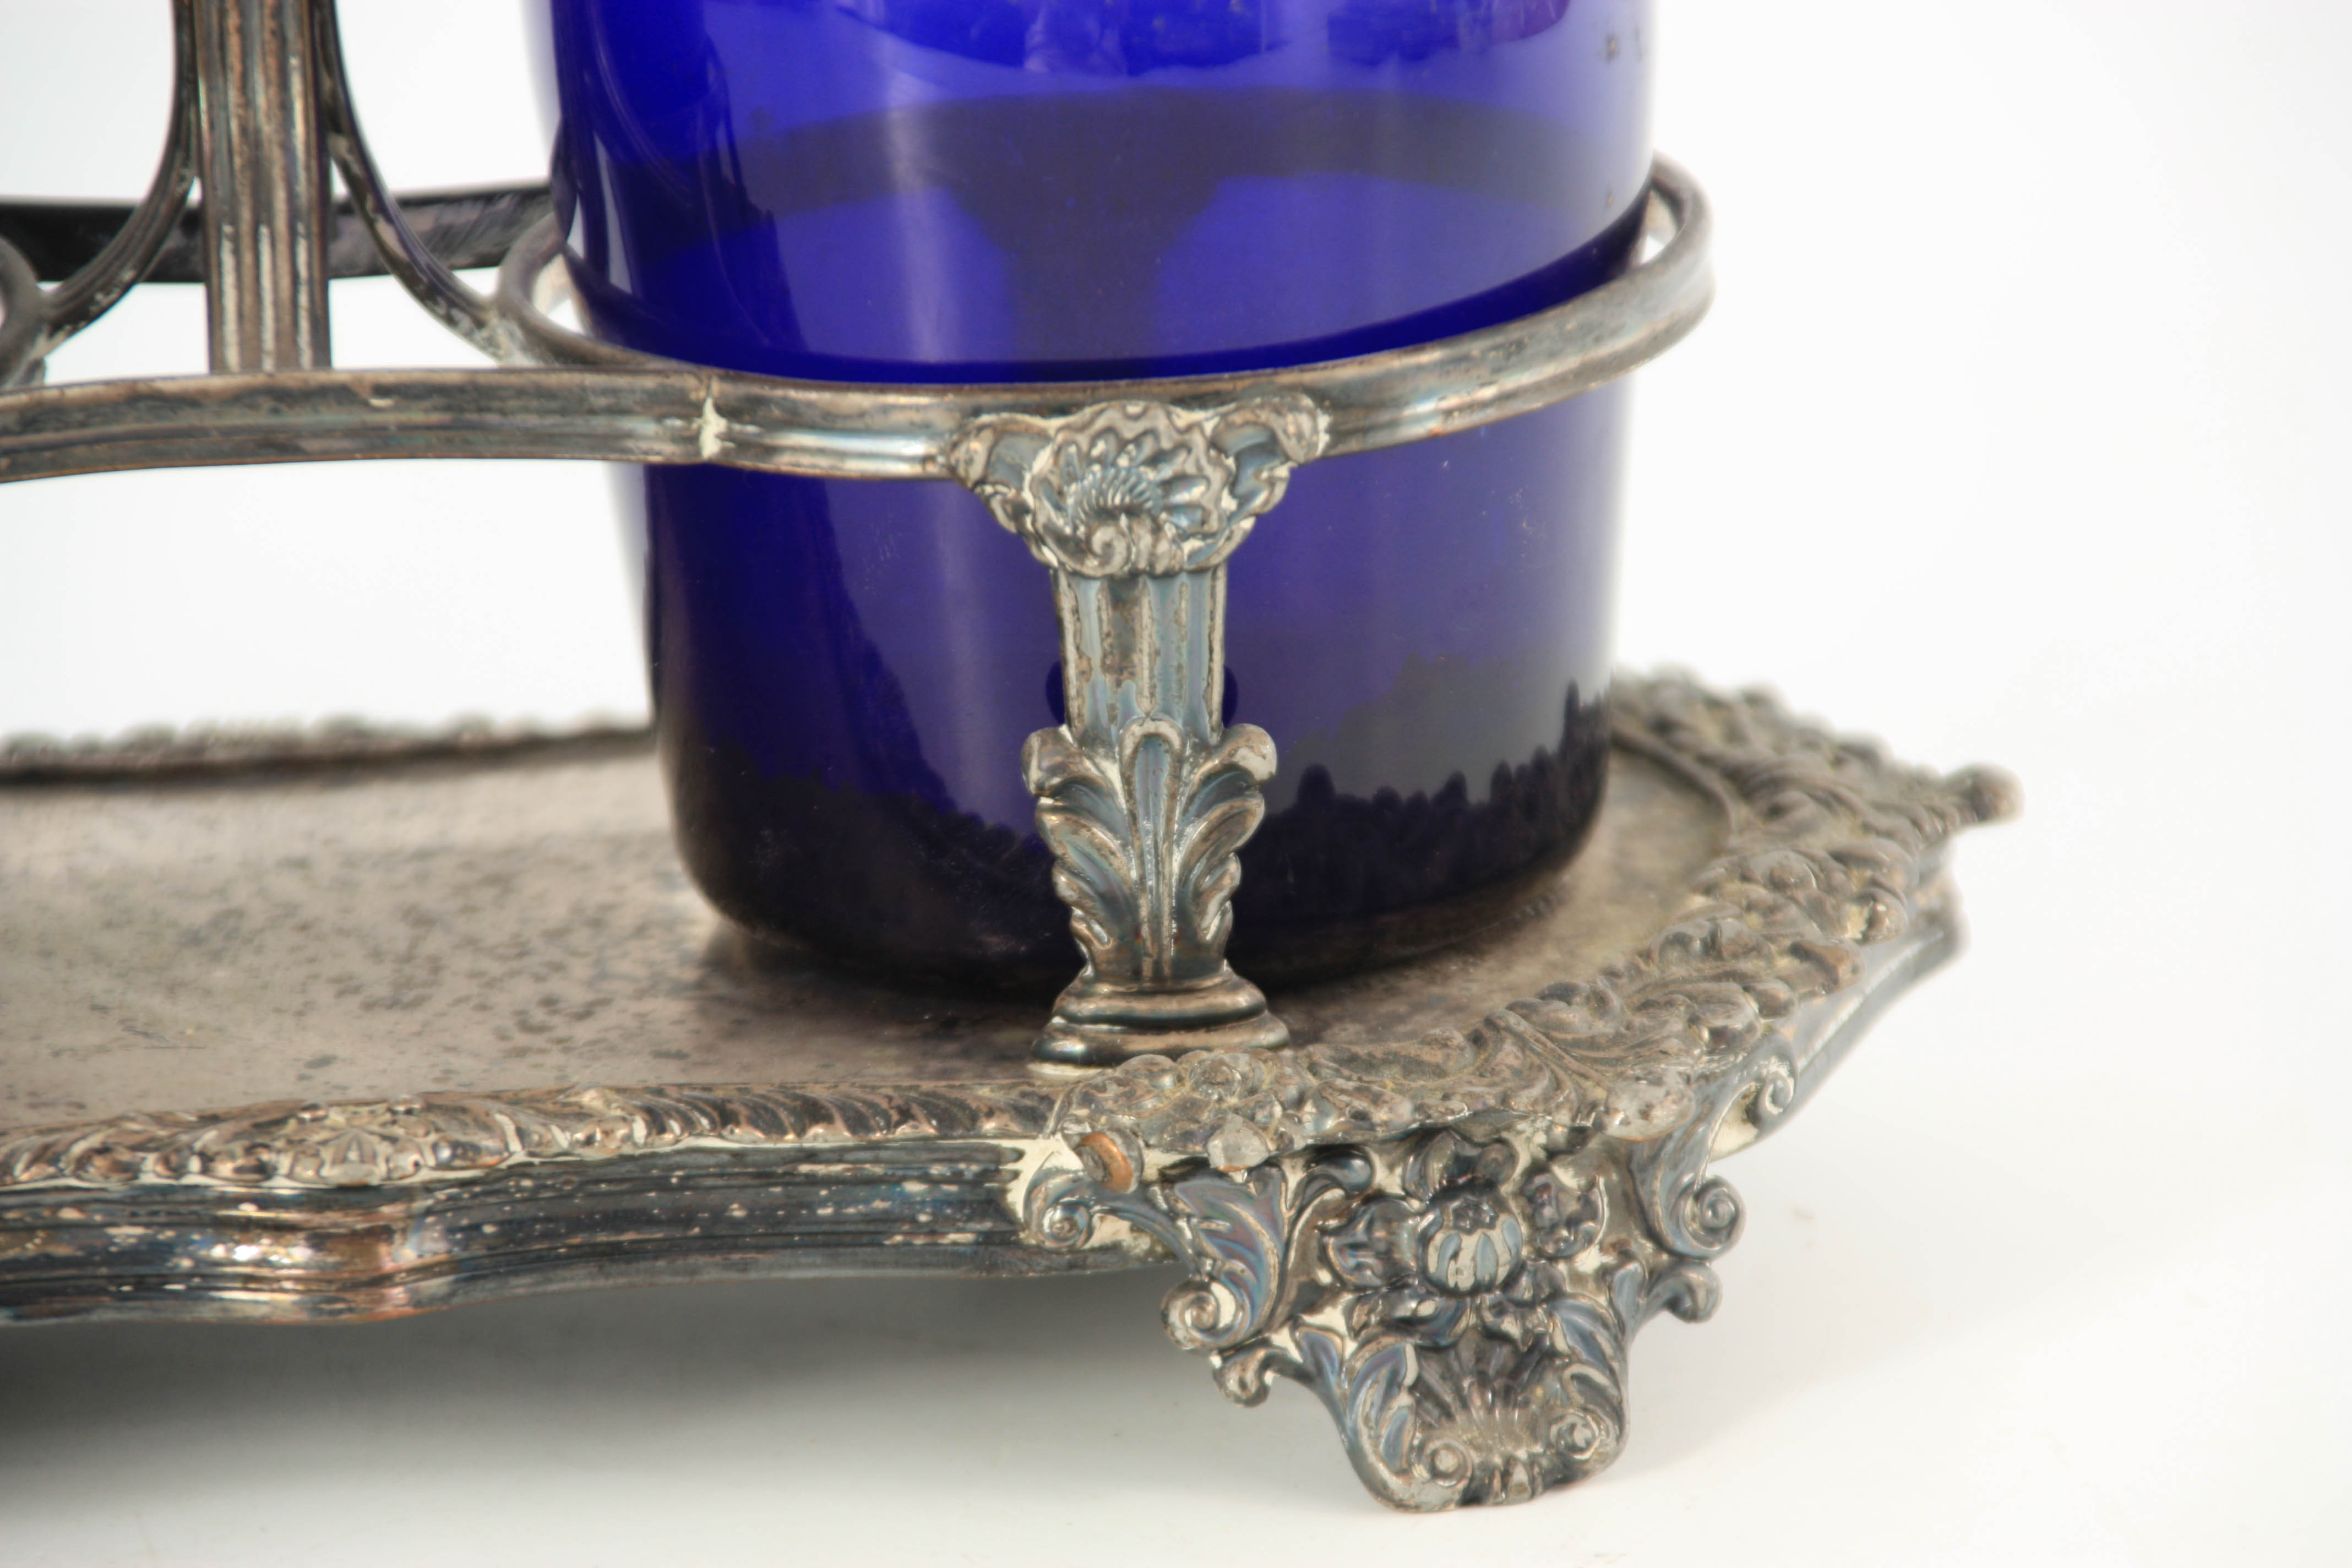 TWO EARLY 19TH CENTURY BRISTOL BLUE DECANTERS FOR RUM AND BRANDY mounted in an old Sheffield plate - Image 2 of 4